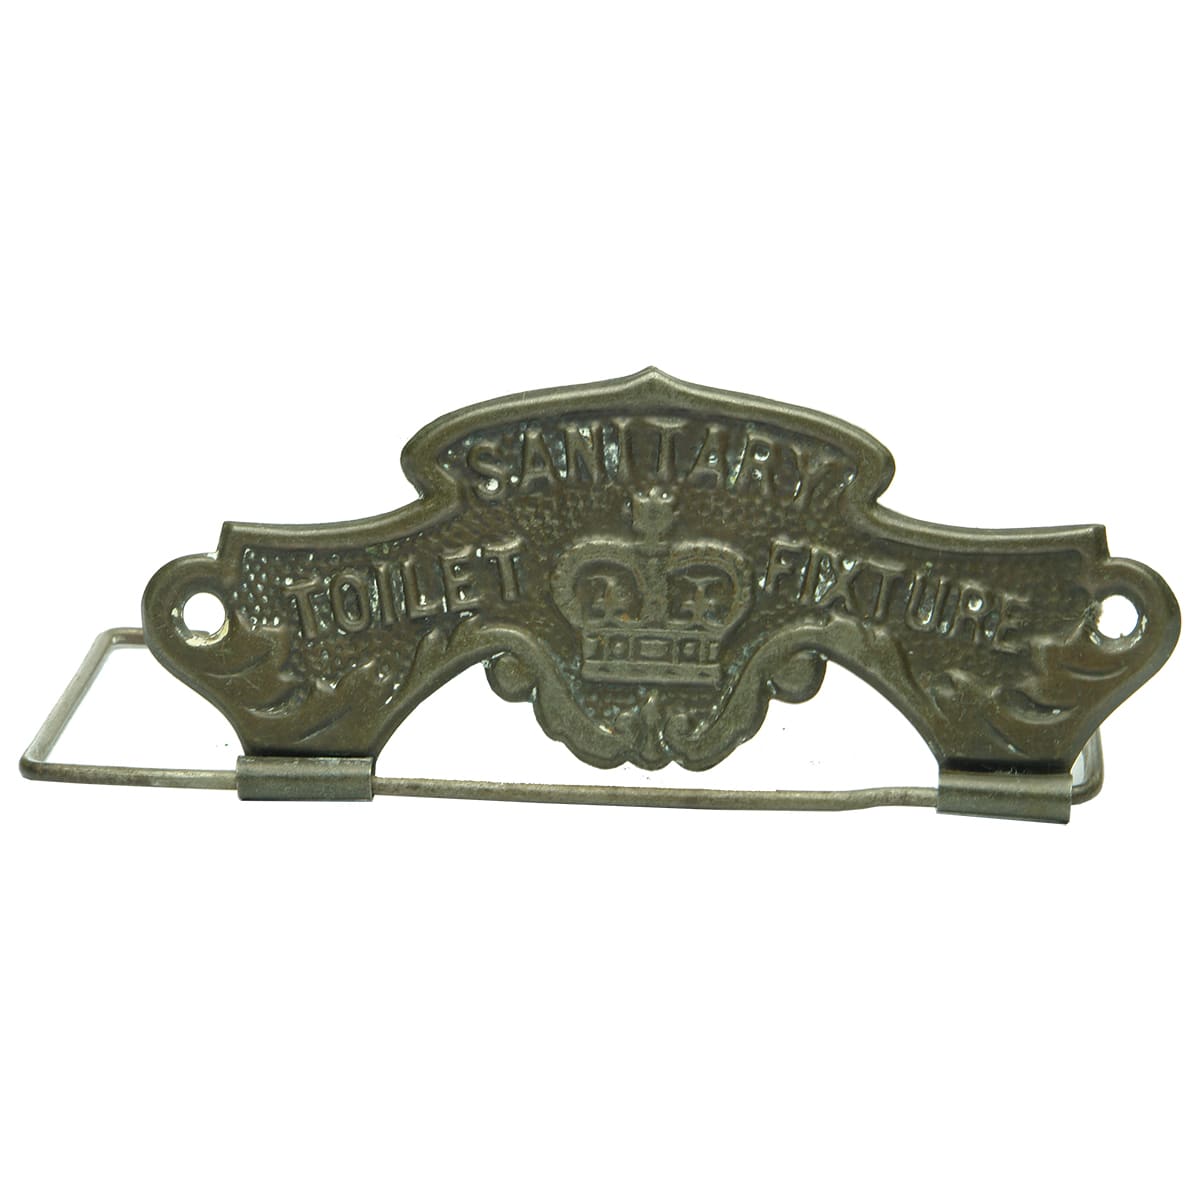 Toilet paper roll holder. Sanitary Toilet Fixture. Crown.